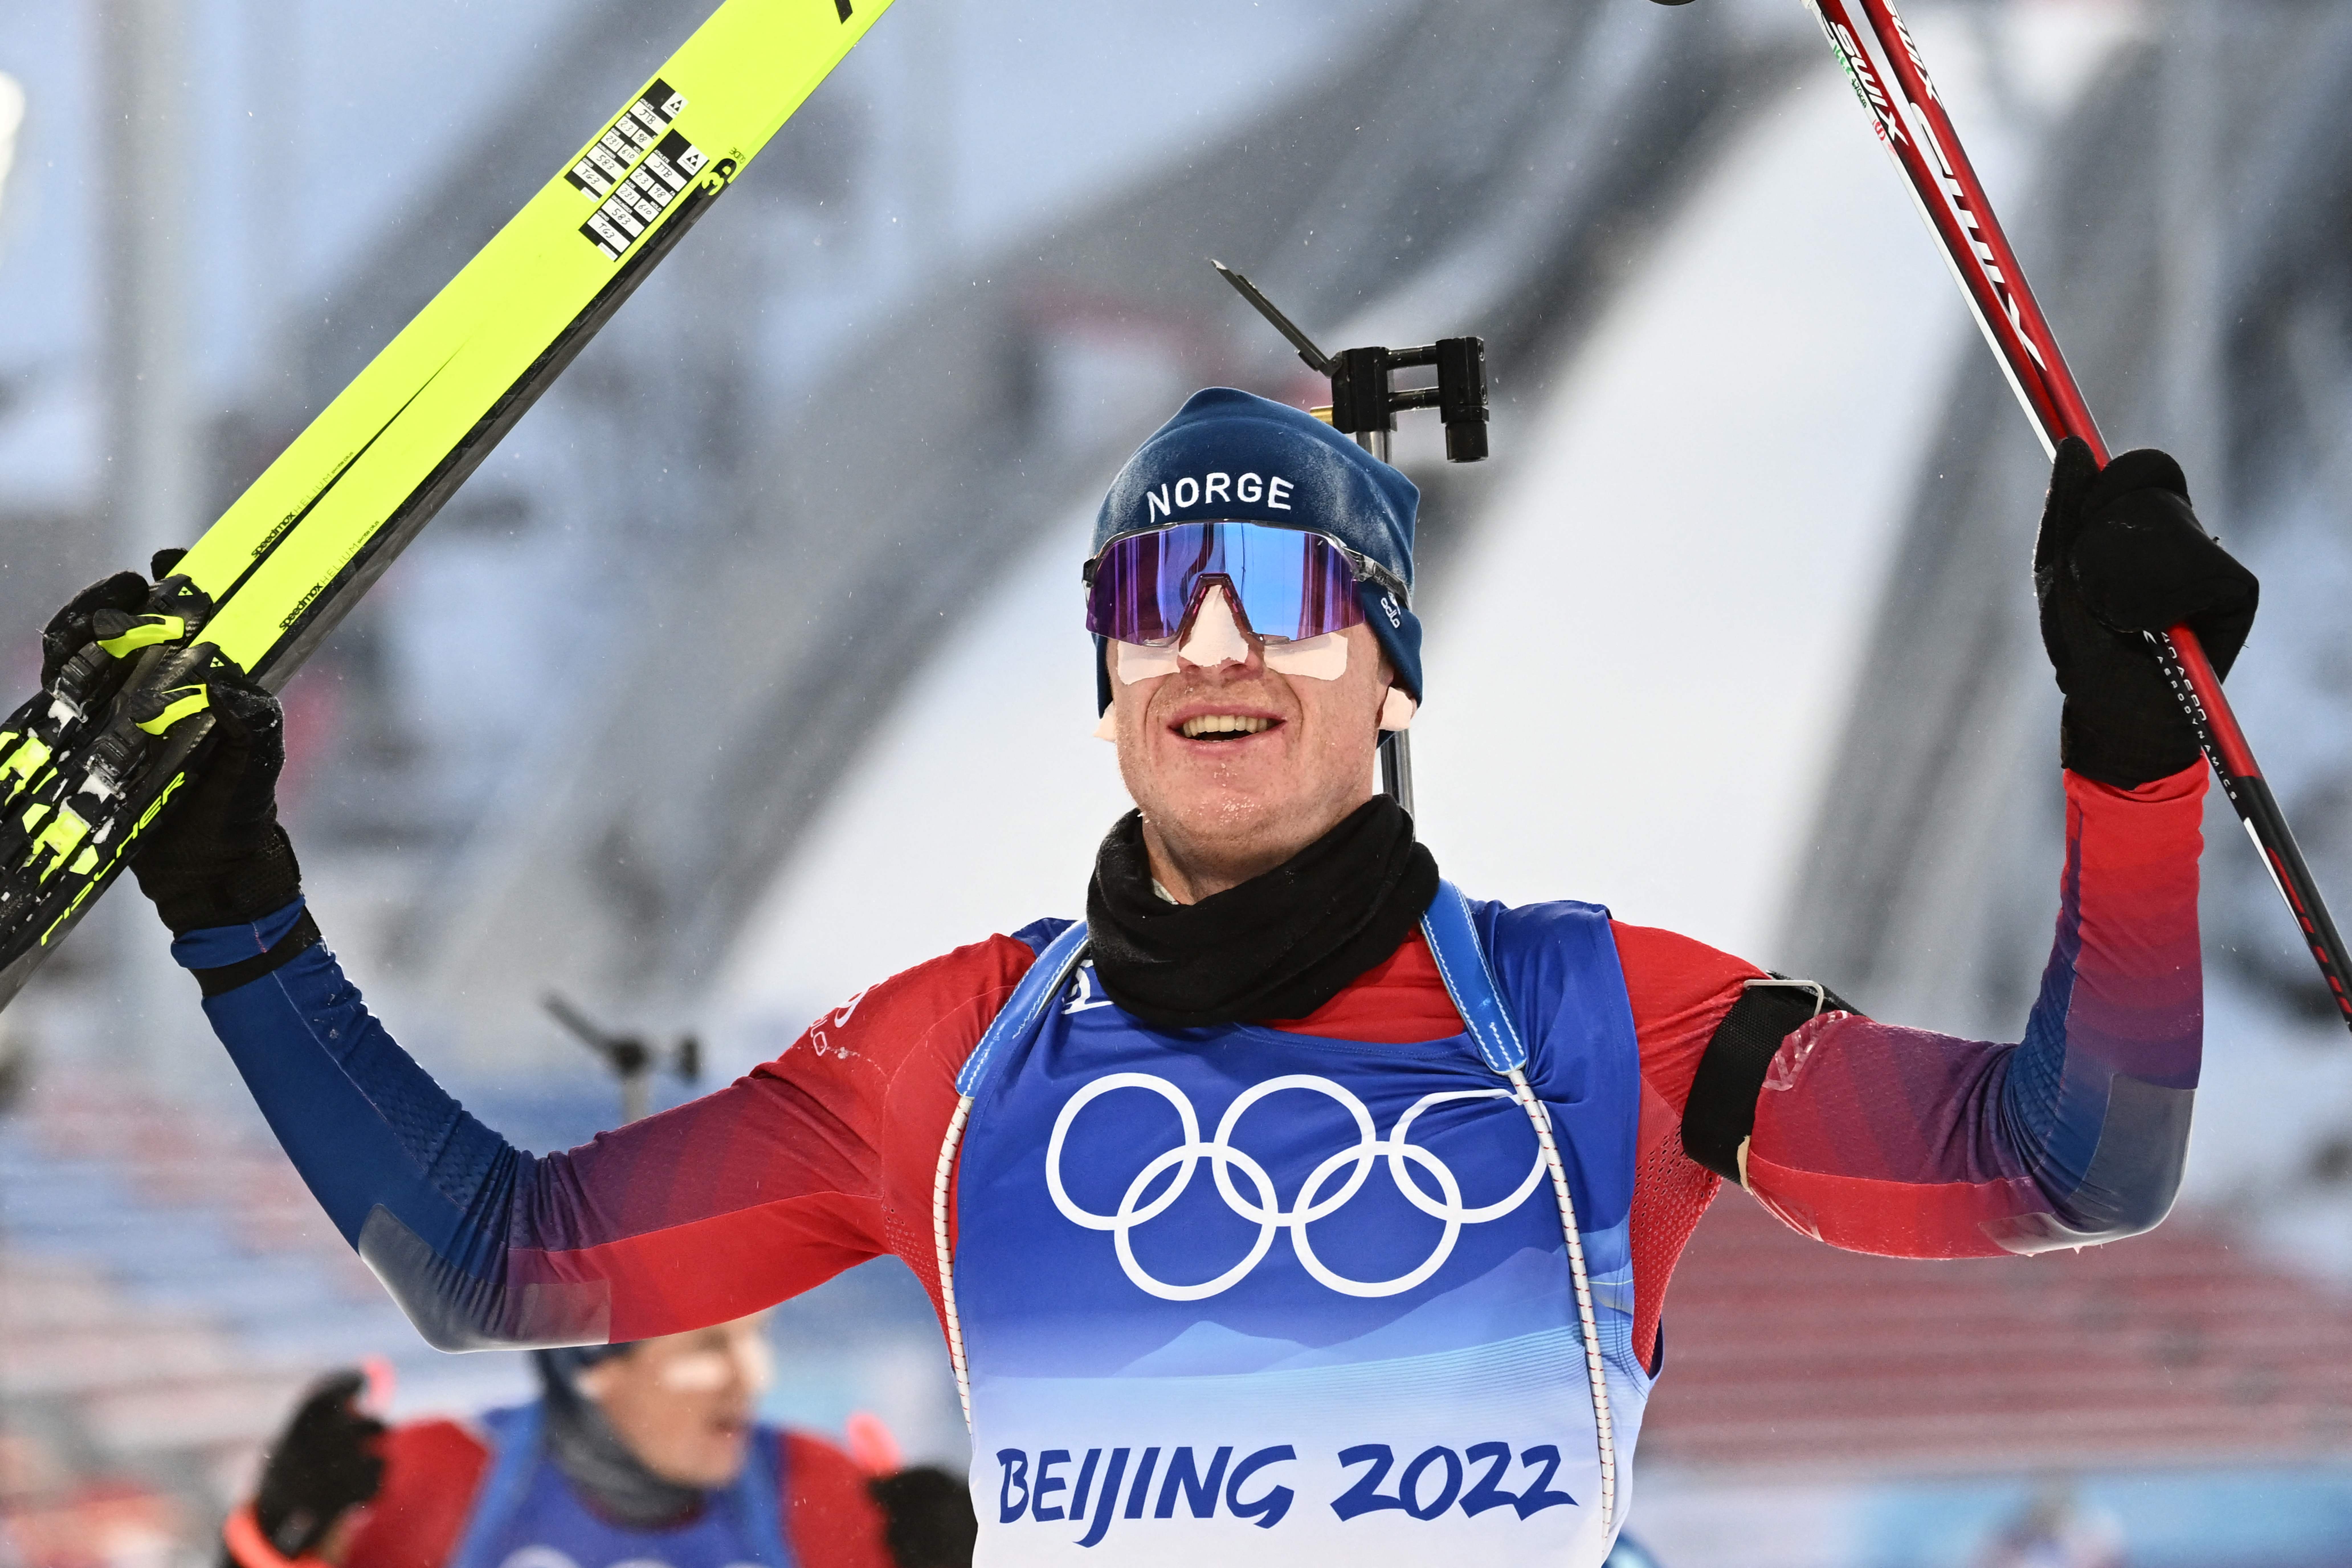 Inside the Numbers of Biathlon Skiing, Shooting at the Olympics